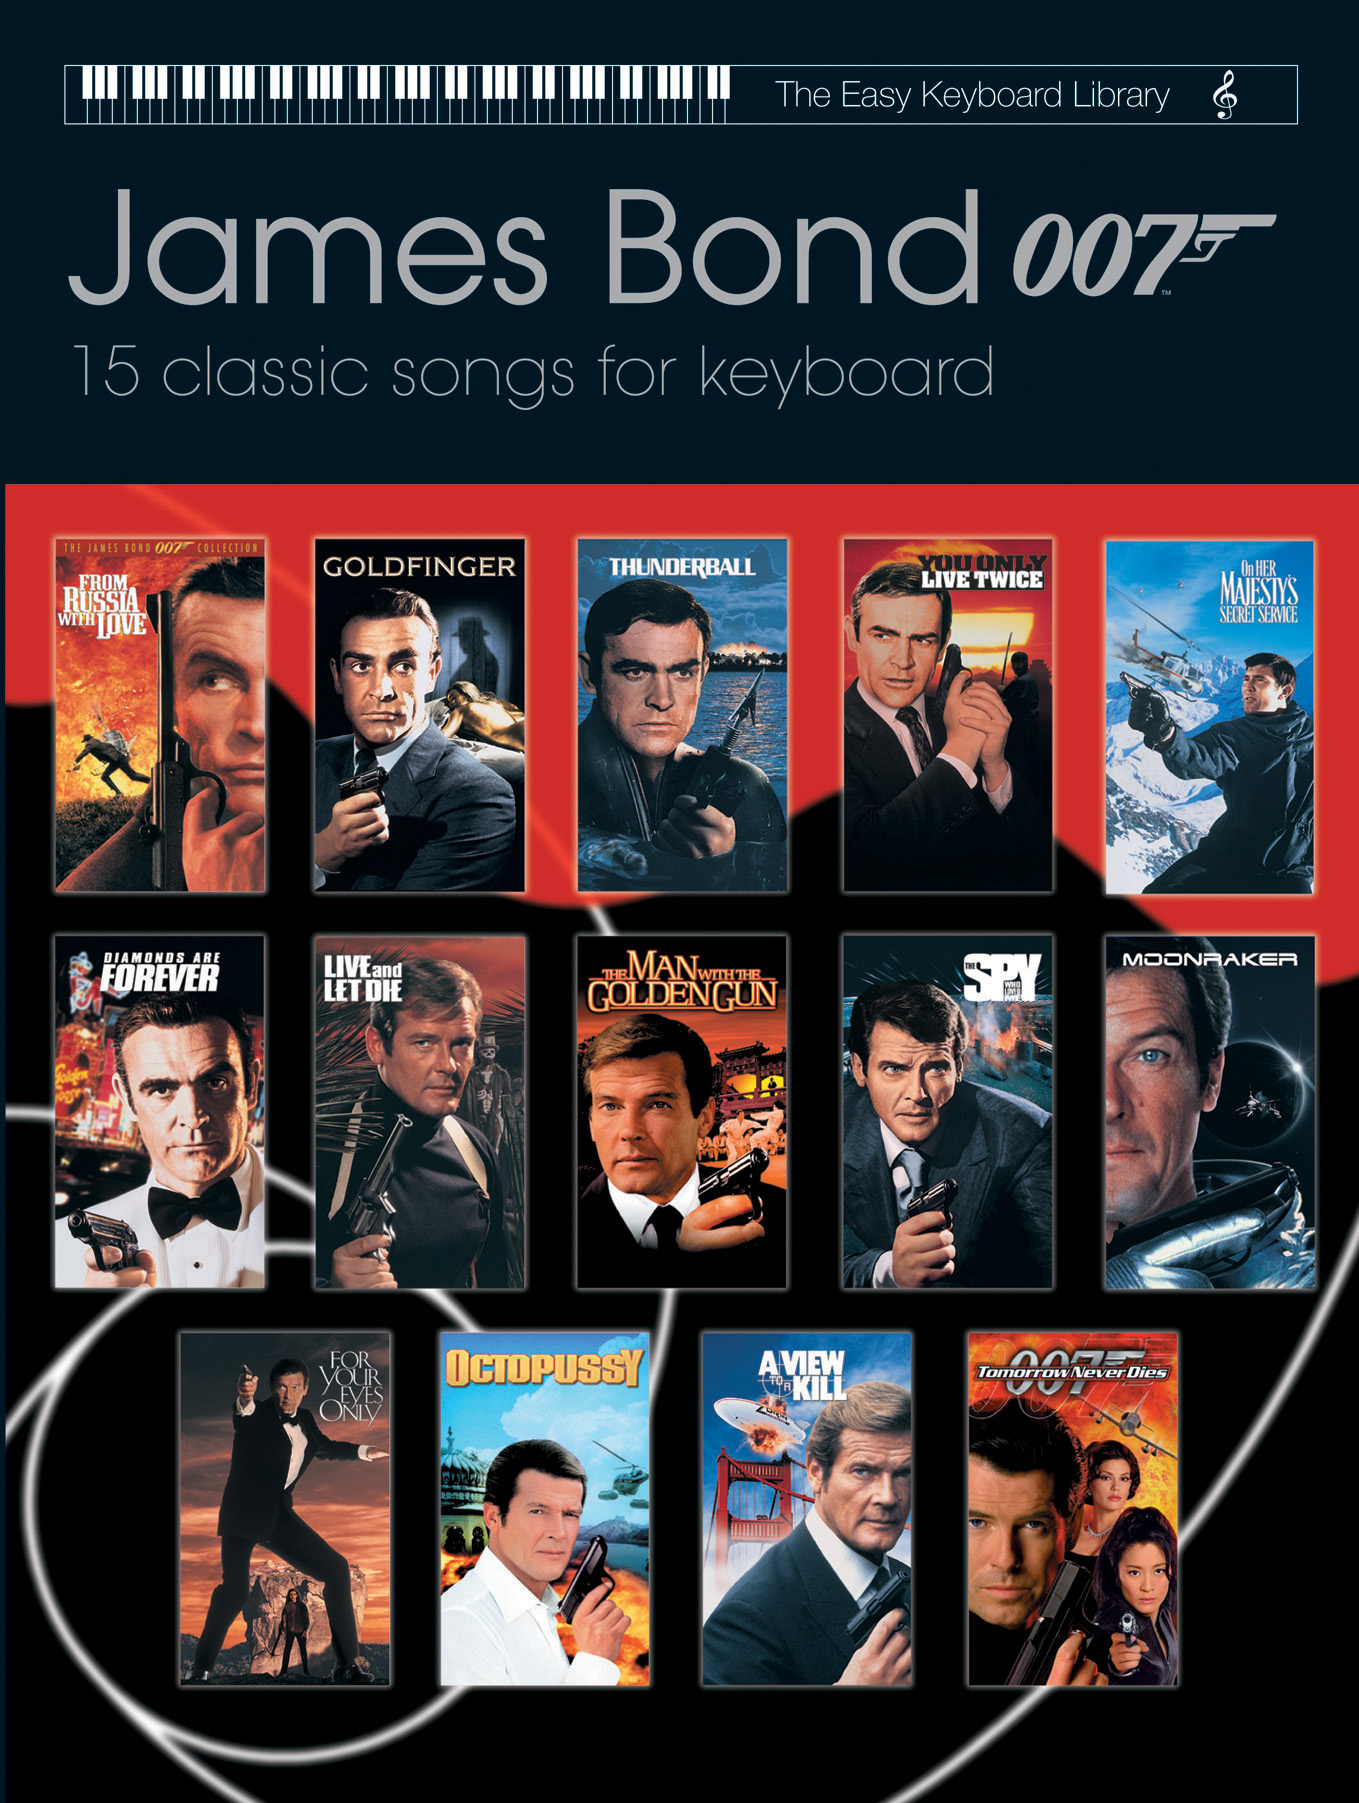 Various: Easy Keyboard Library: James Bond 007: Electric Keyboard: Mixed